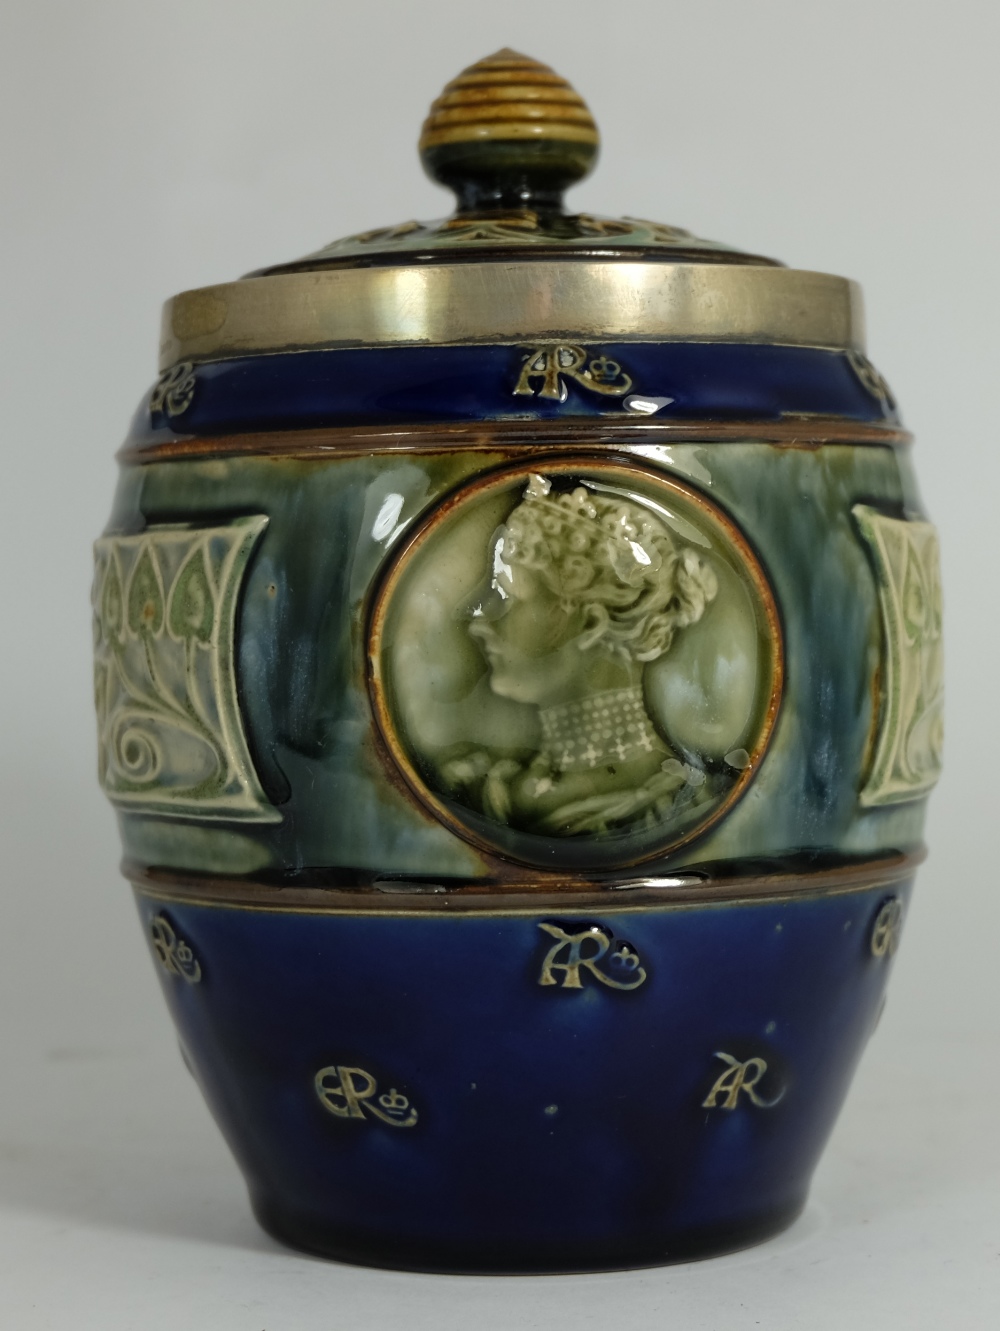 Royal Doulton Lambeth Stoneware Art Nouveau Style Blue and Green Jar and Cover Depicting King George